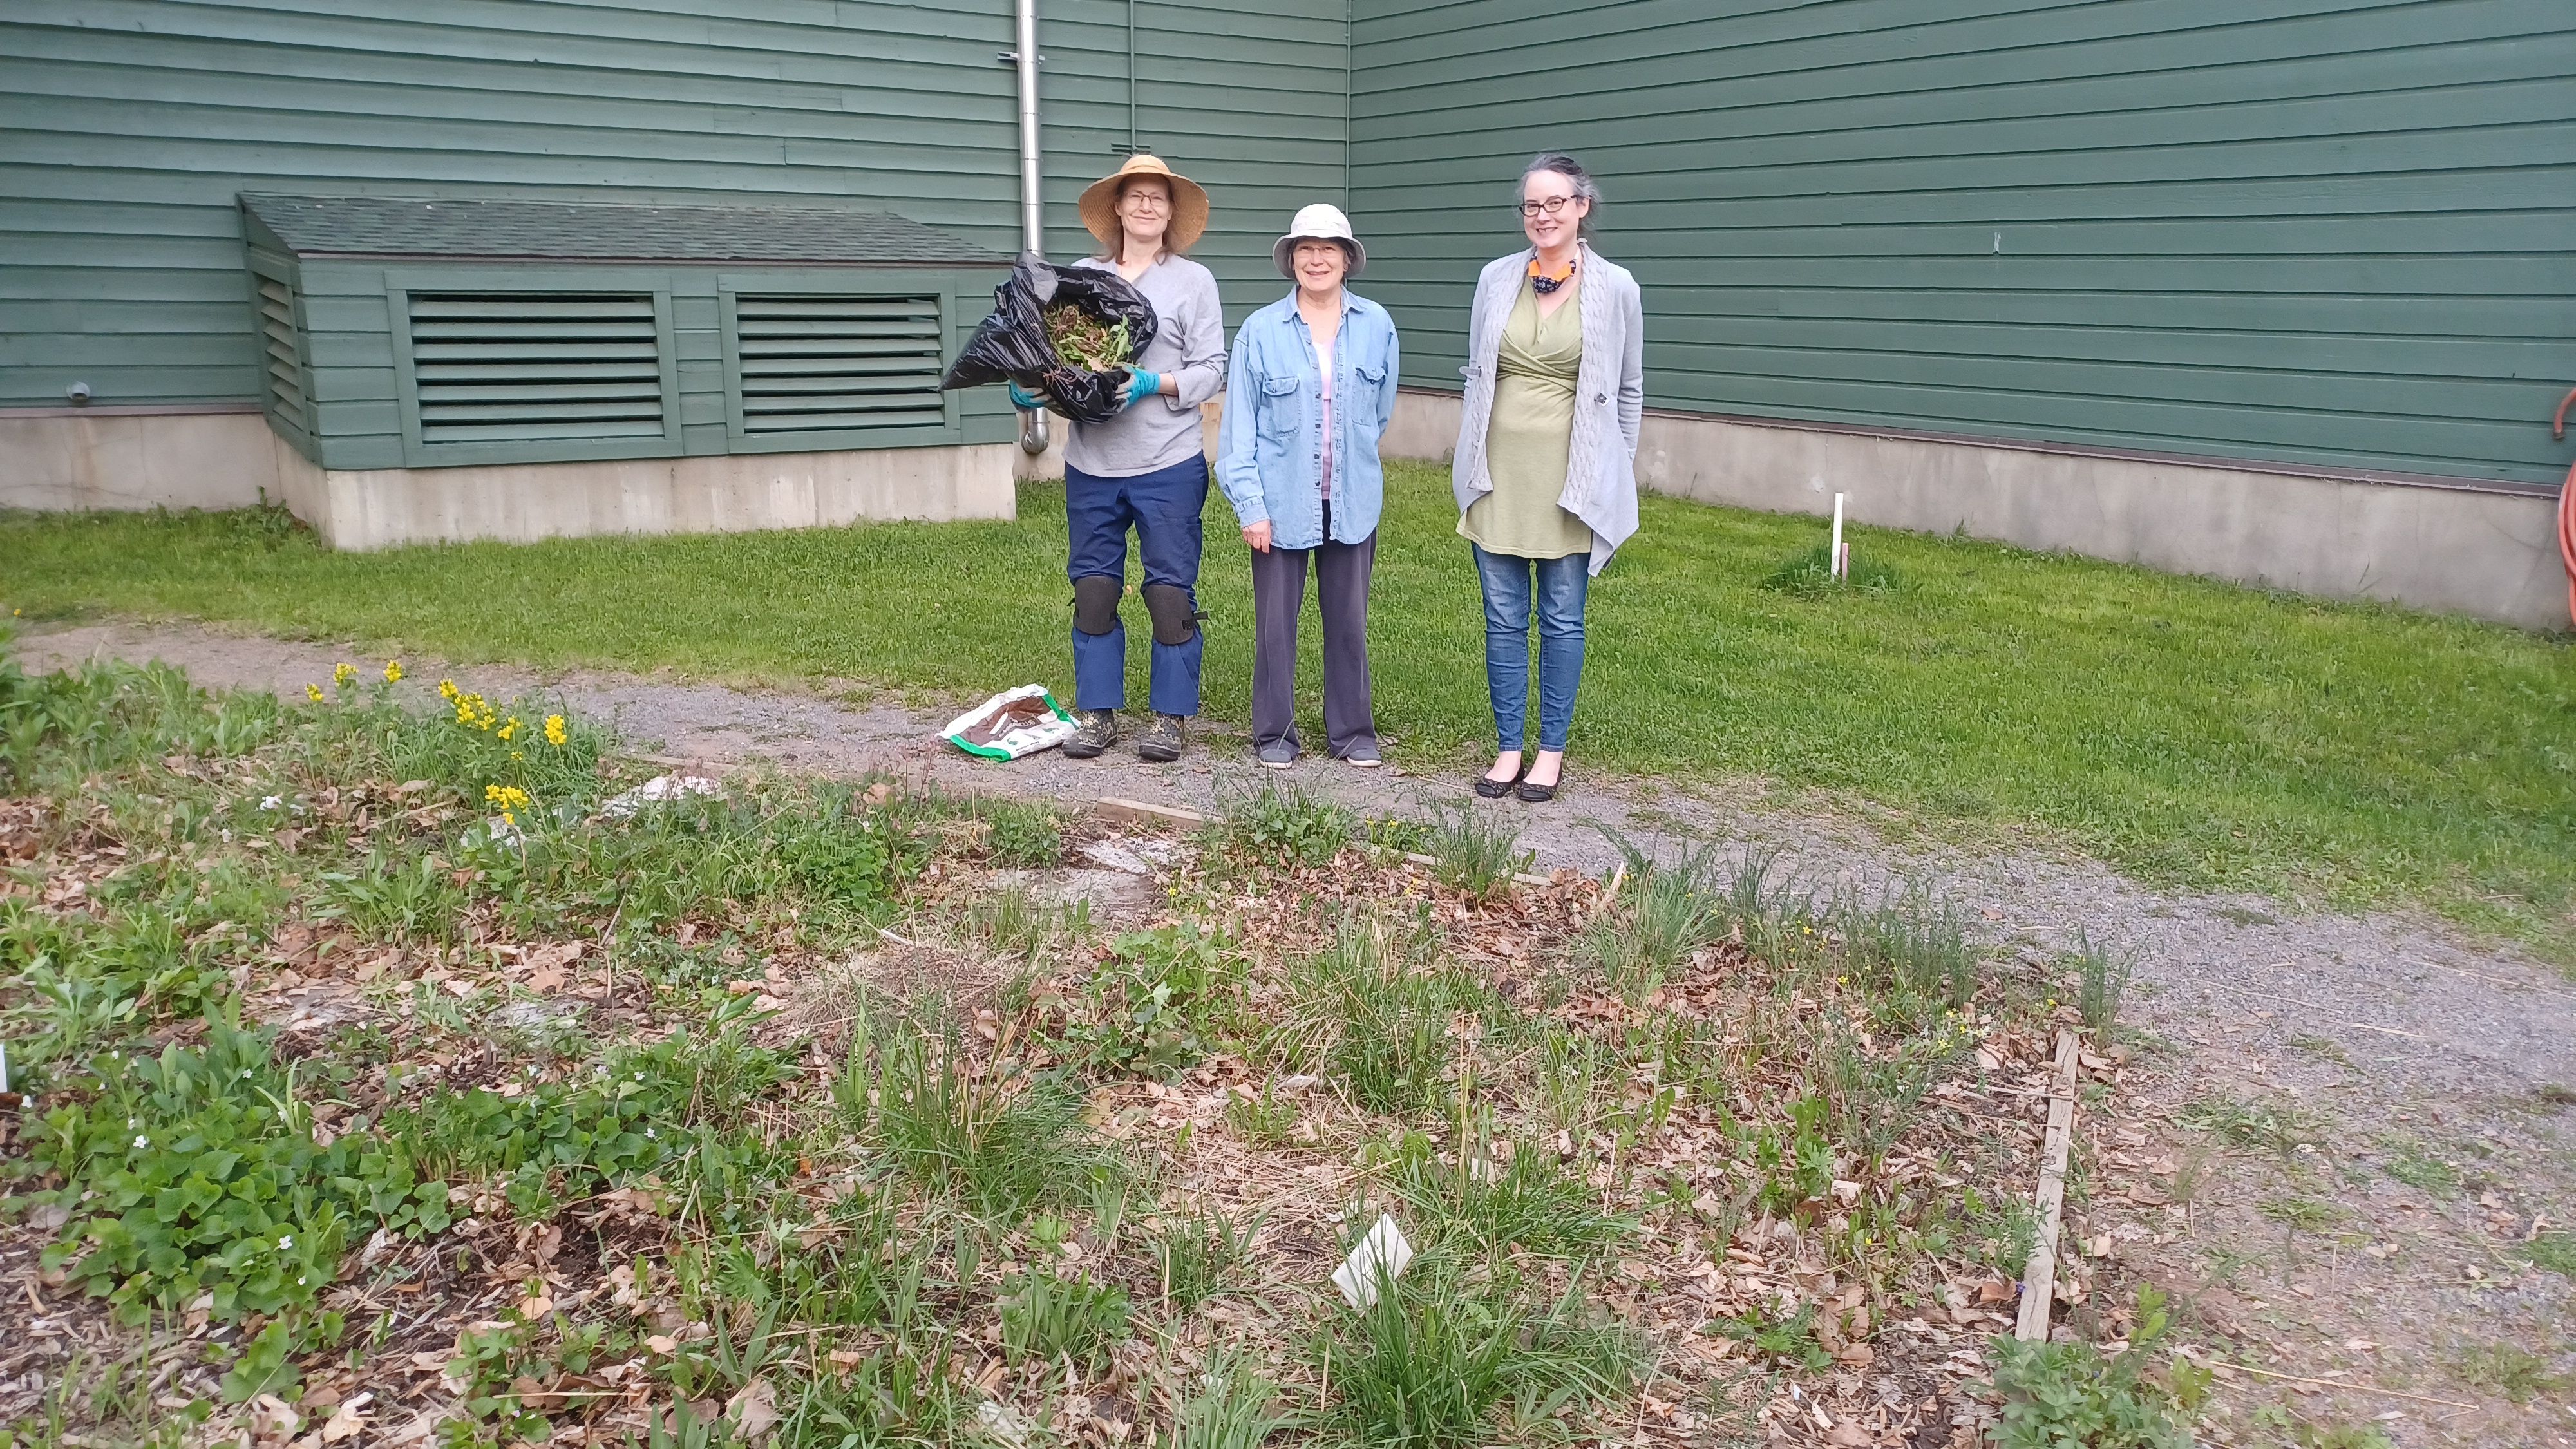 image of volunteers with a bag of weeds standing behind a native plant bed